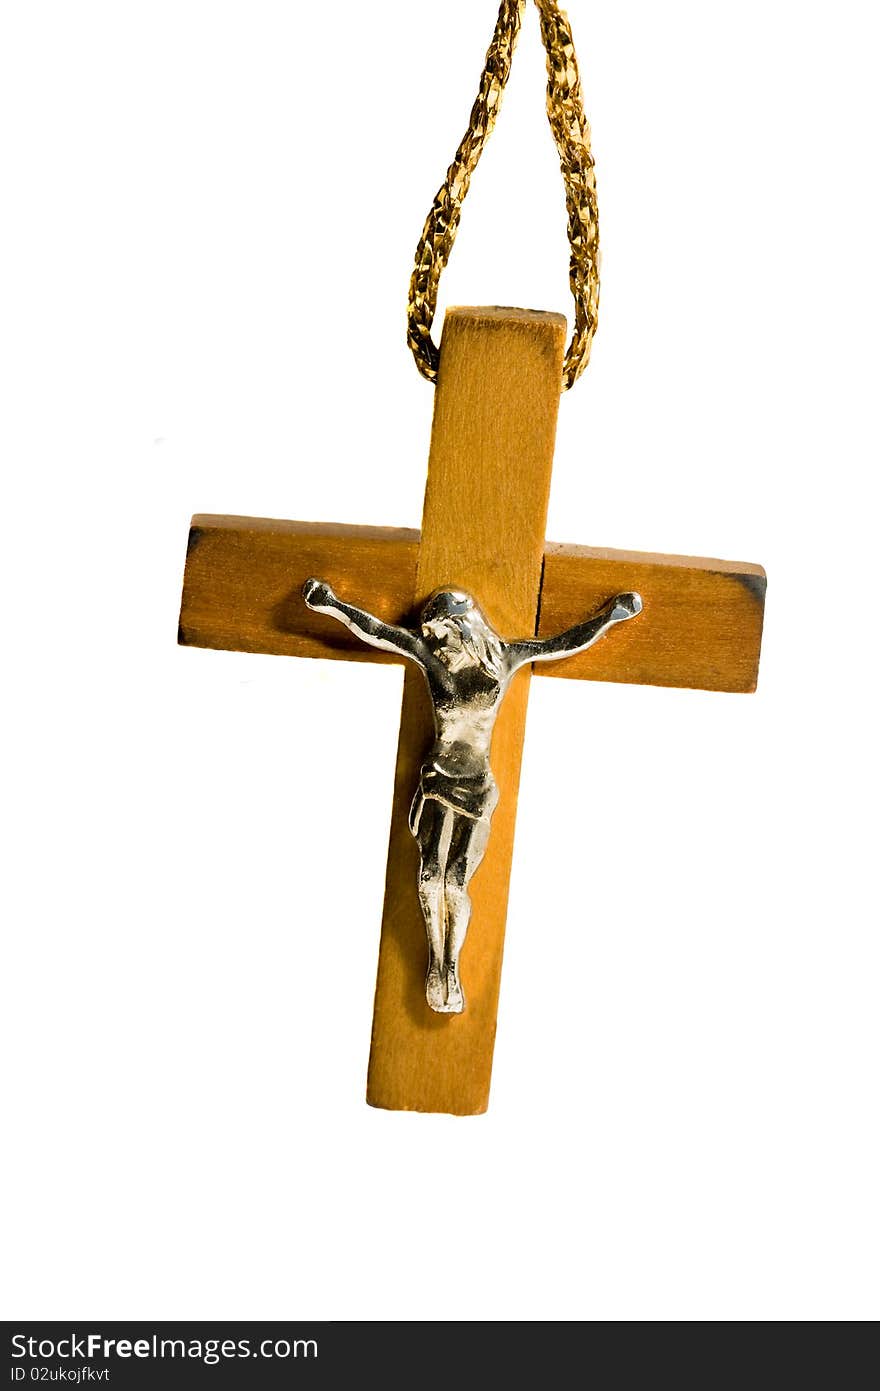 Cross from a tree, photographed on a white background. Cross from a tree, photographed on a white background